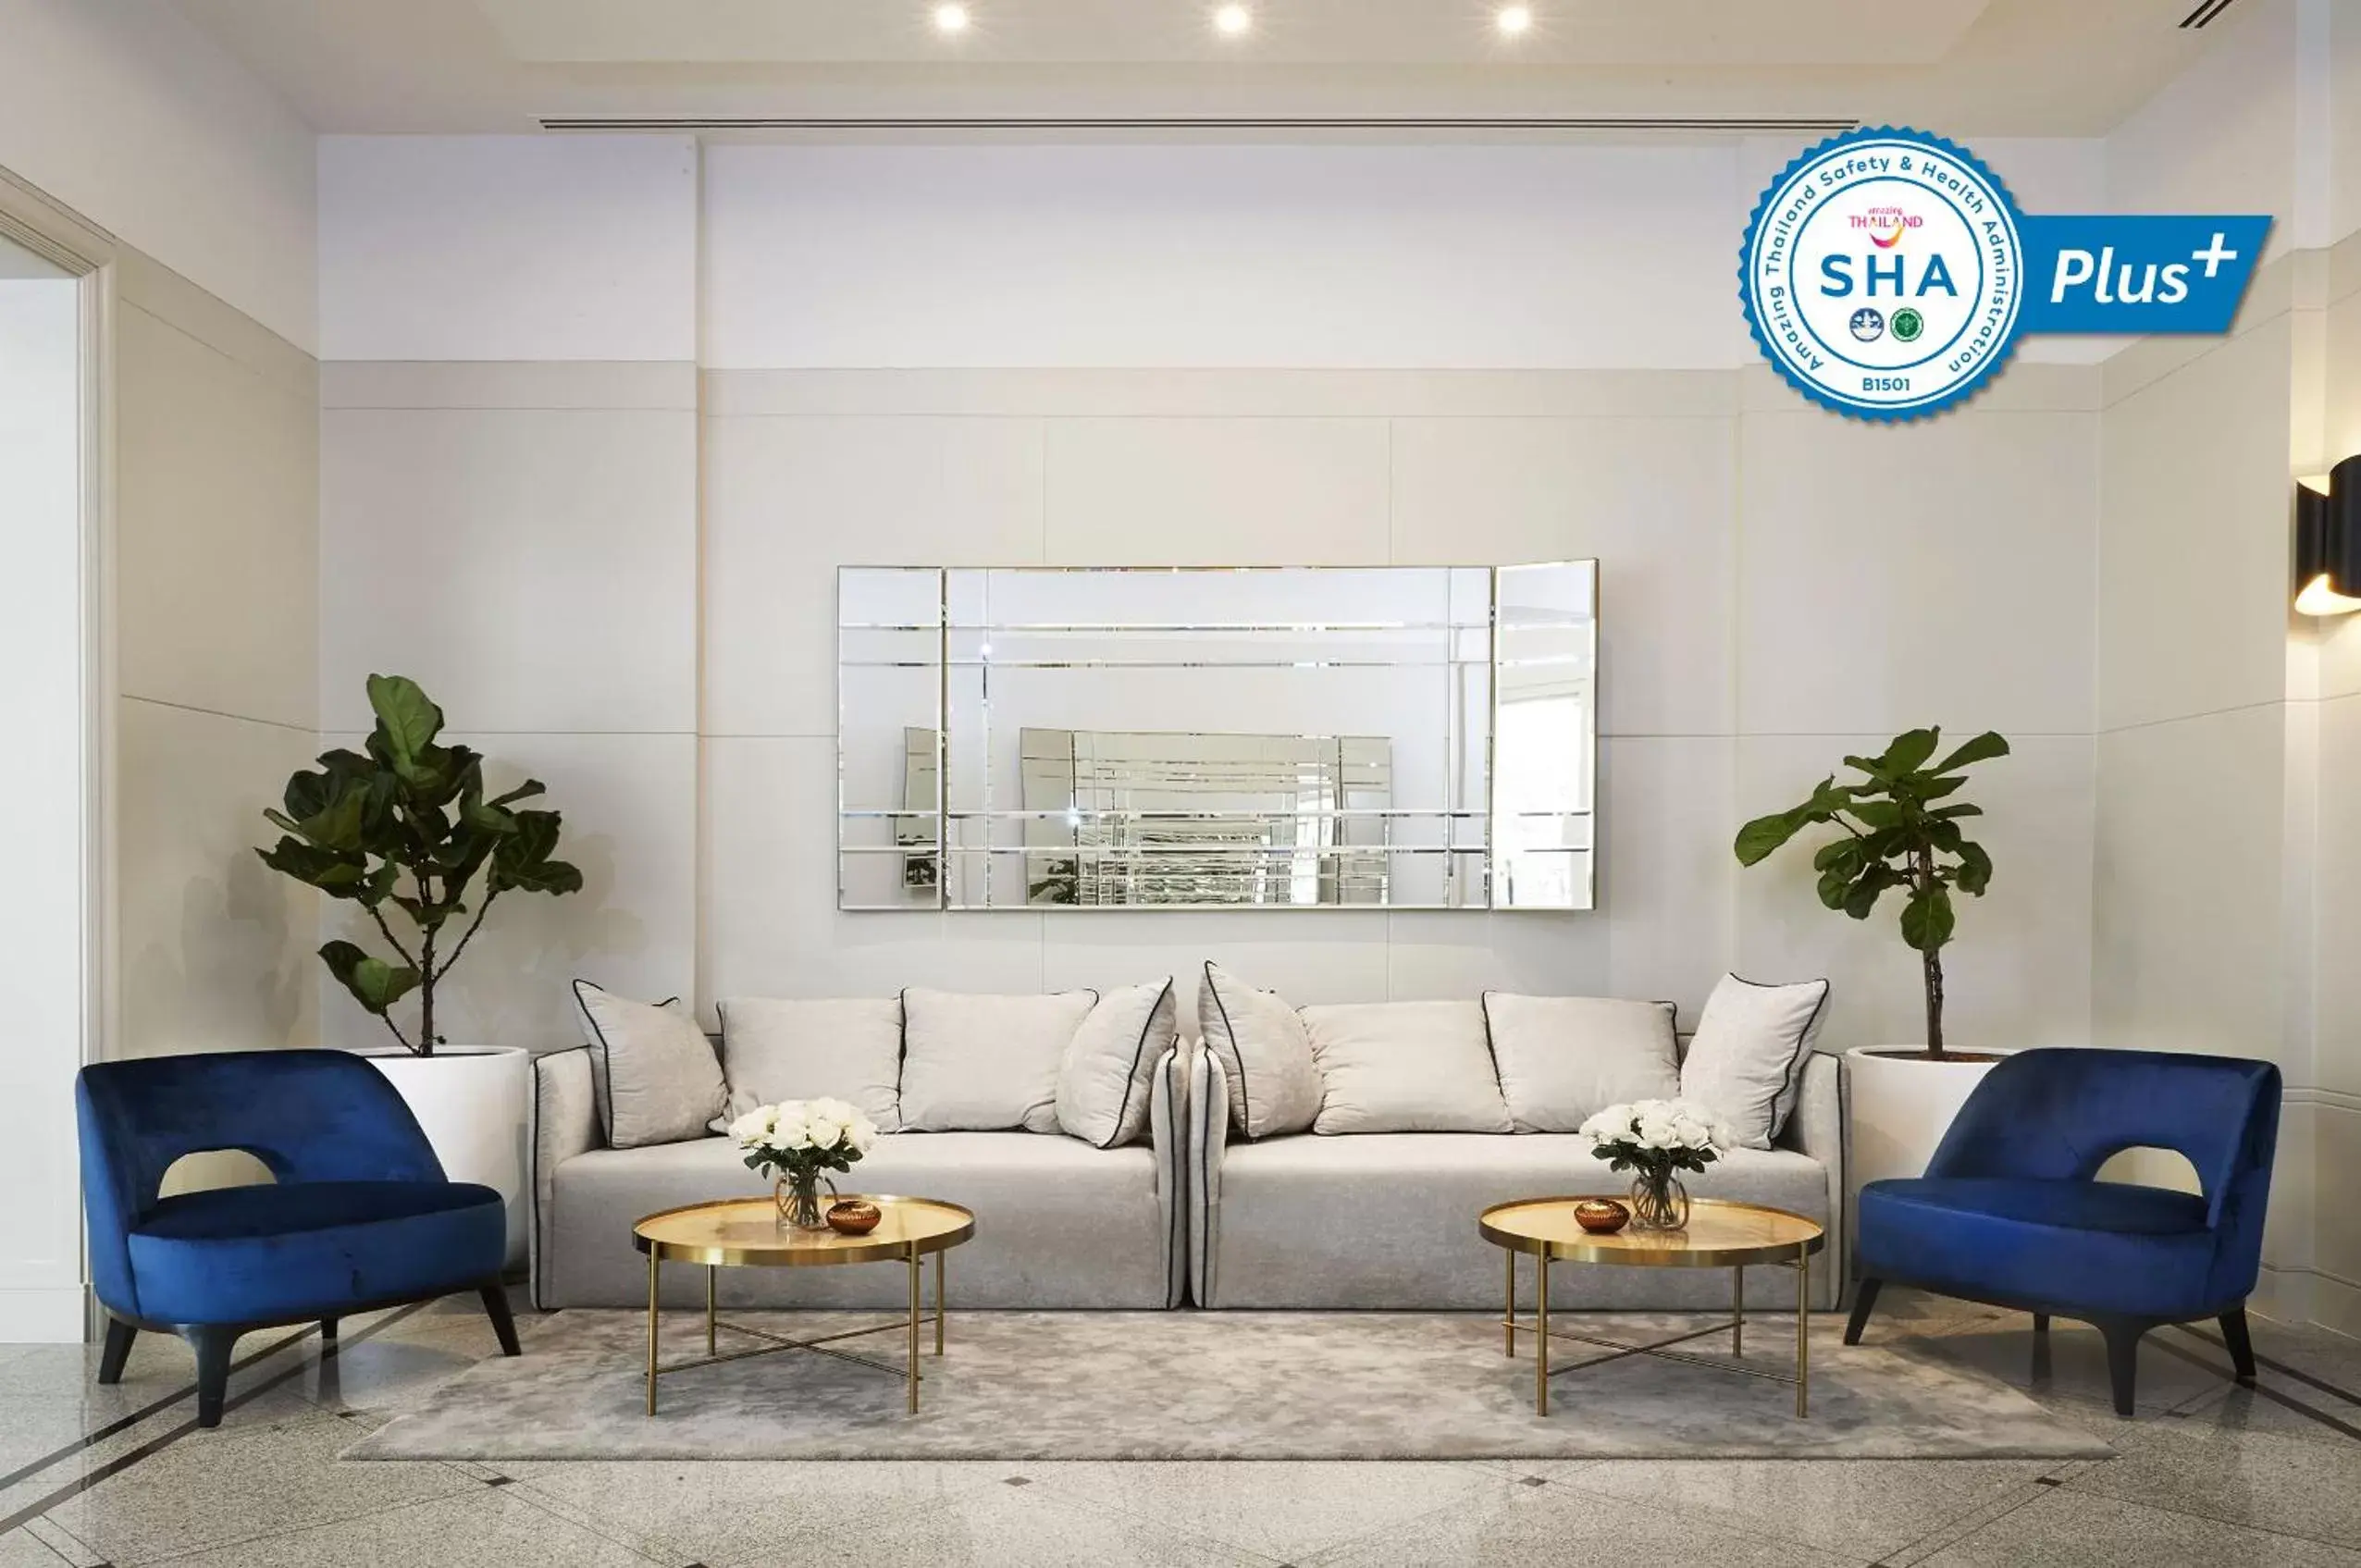 Property building, Seating Area in Bliston Suwan Park View - SHA Plus